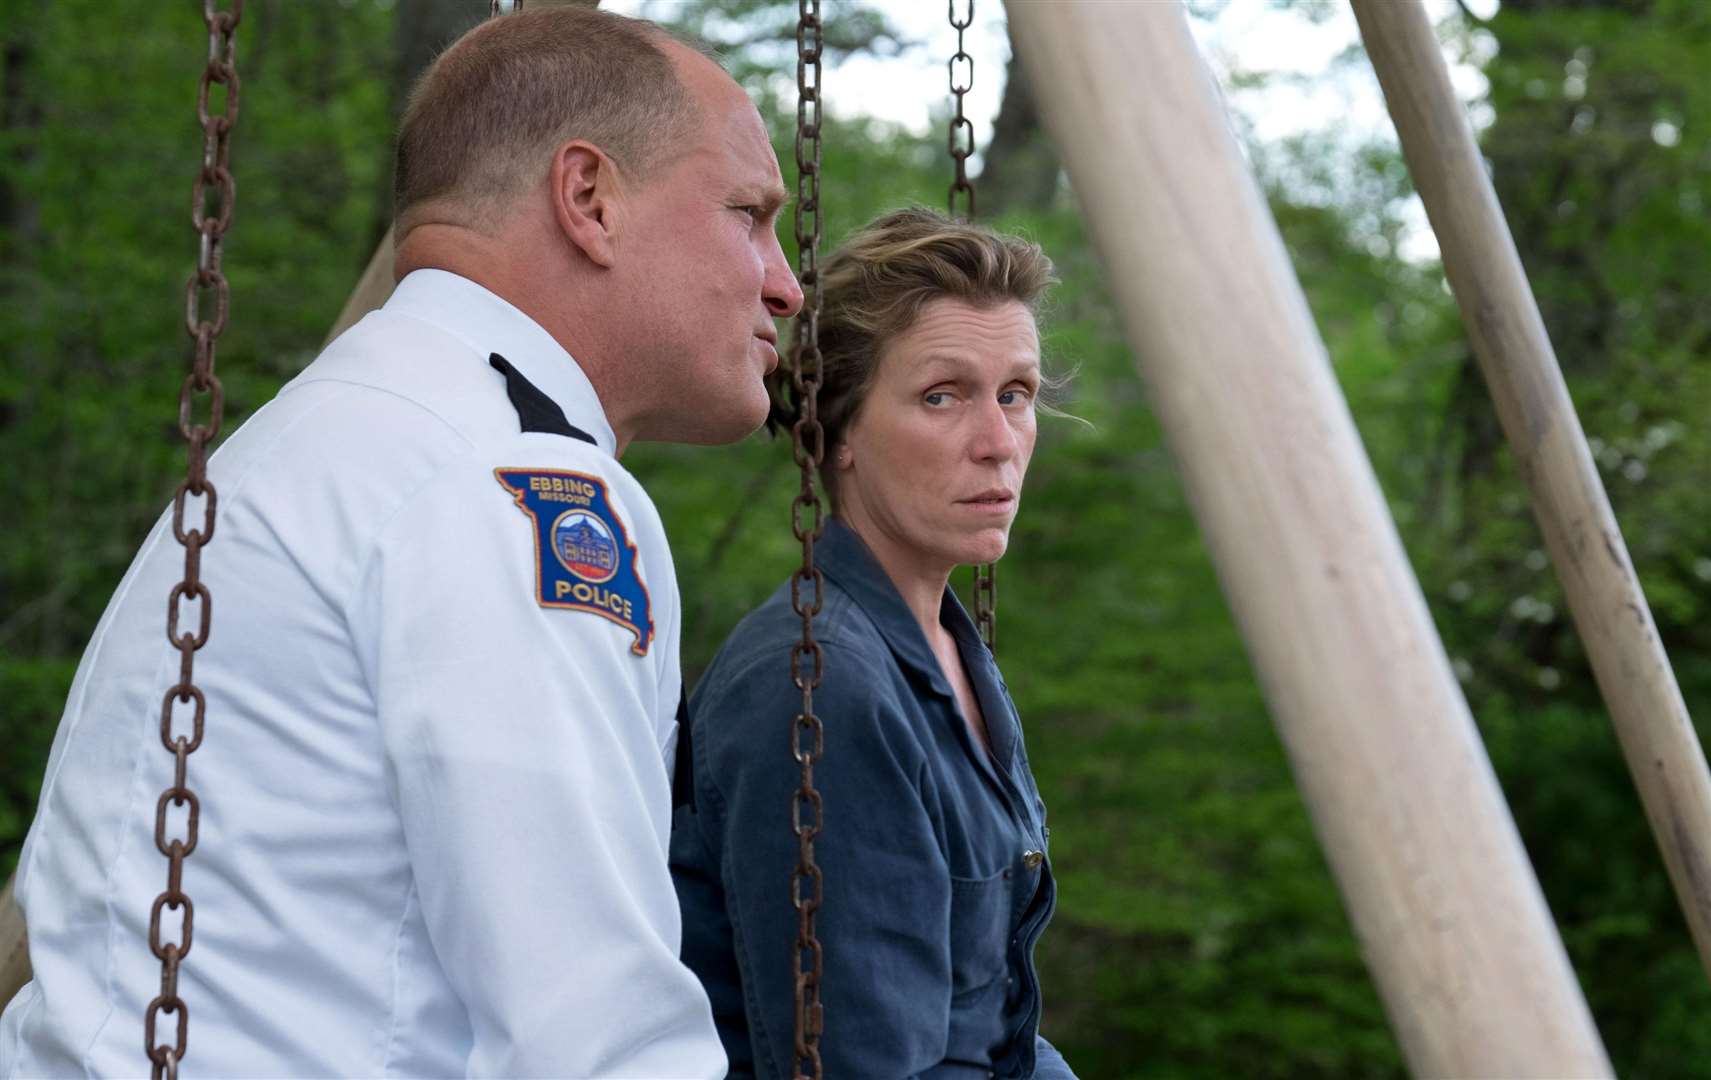 Three Billboards Outside Ebbing, Missouri. Pictured: Woody Harrelson as Sheriff Bill Willoughby and Frances McDormand as Mildred Hayes. Picture: PA Photo/Twentieth Century Fox Film Corporation/Merrick Morton